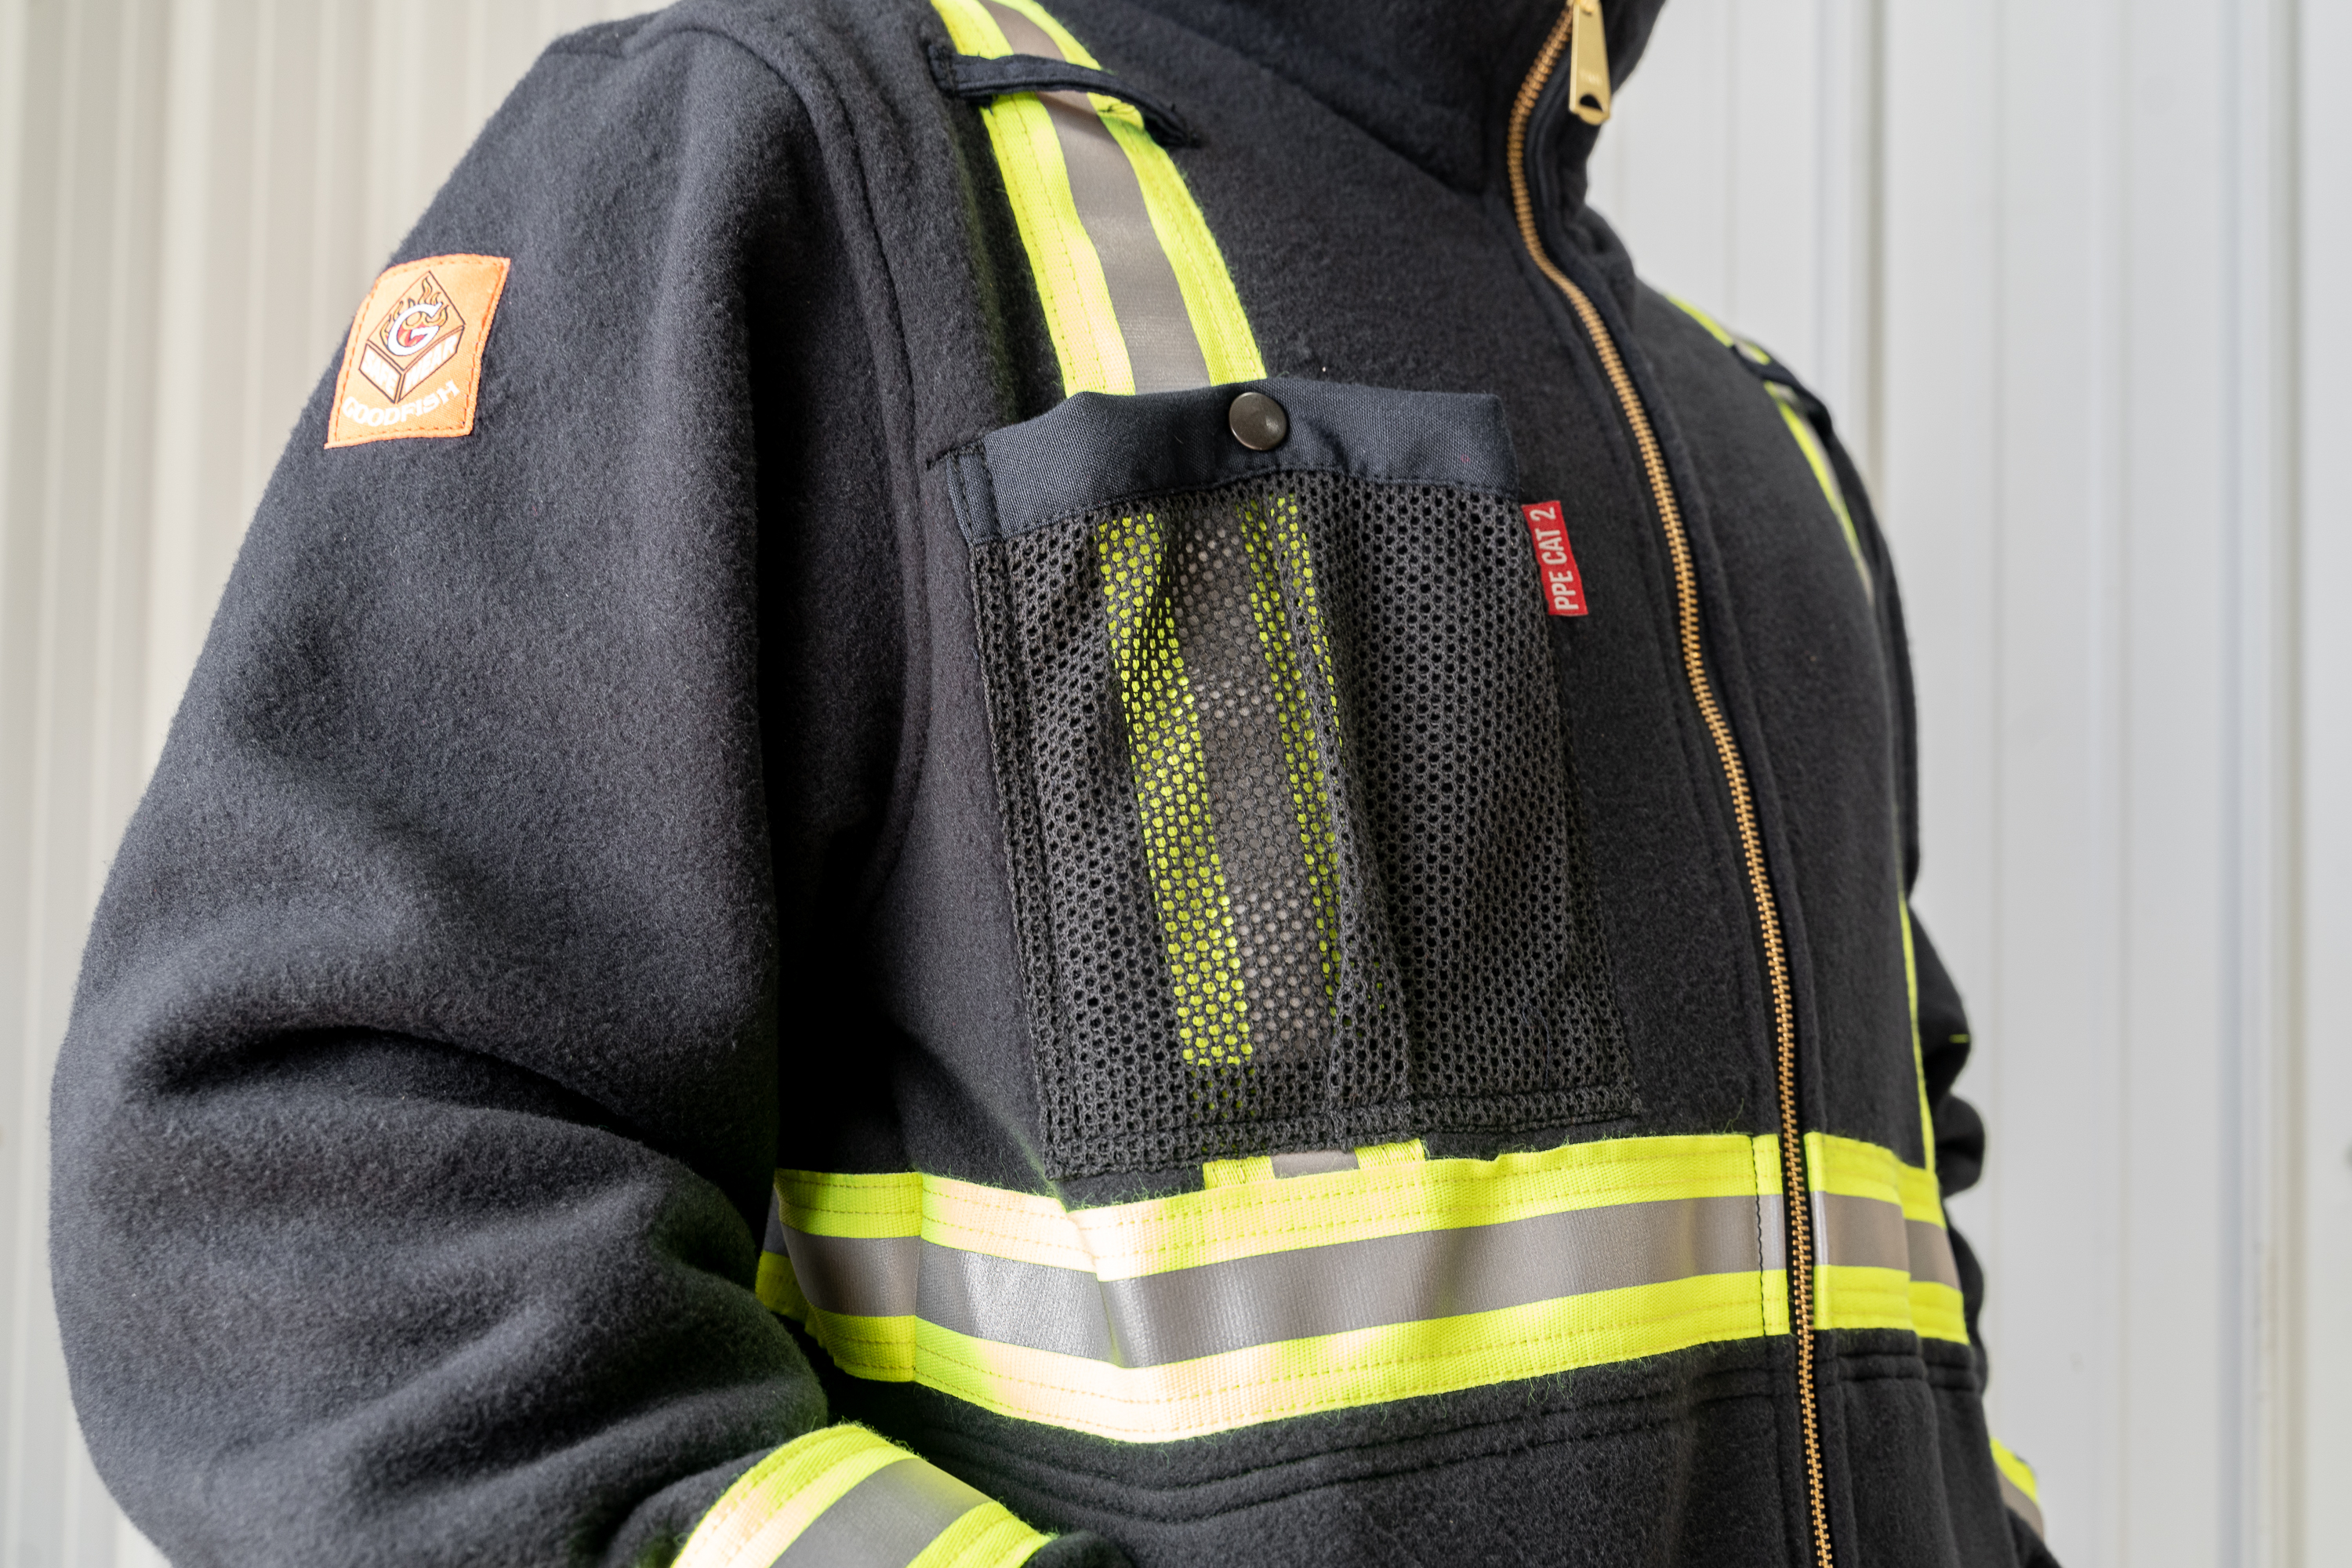 Buy the Best PPE Workwear for Your Employees